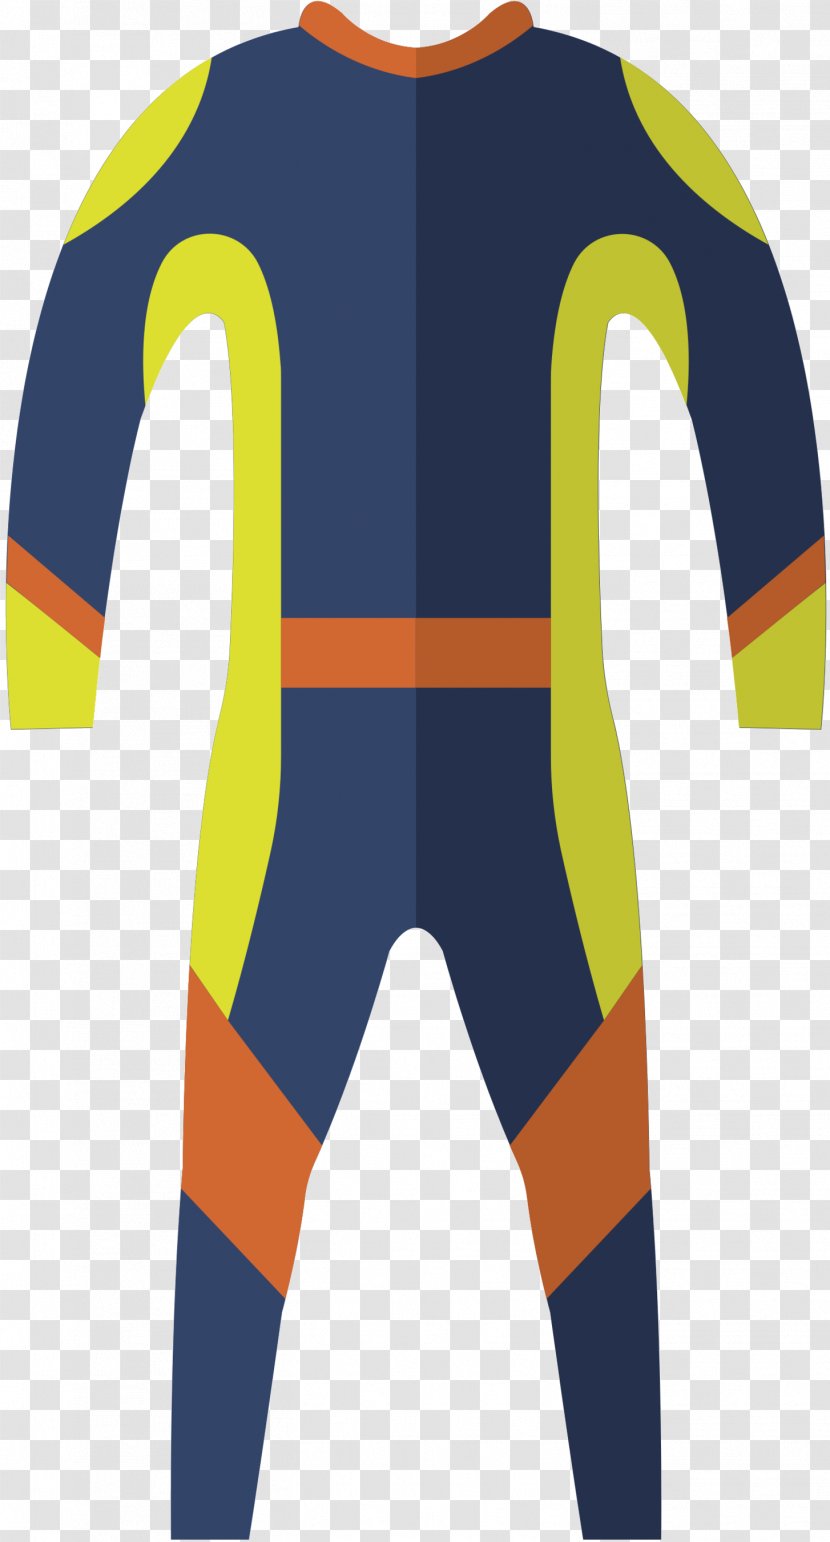 Wetsuit Product Design Clip Art - Personal Protective Equipment - Underwater Diving Transparent PNG